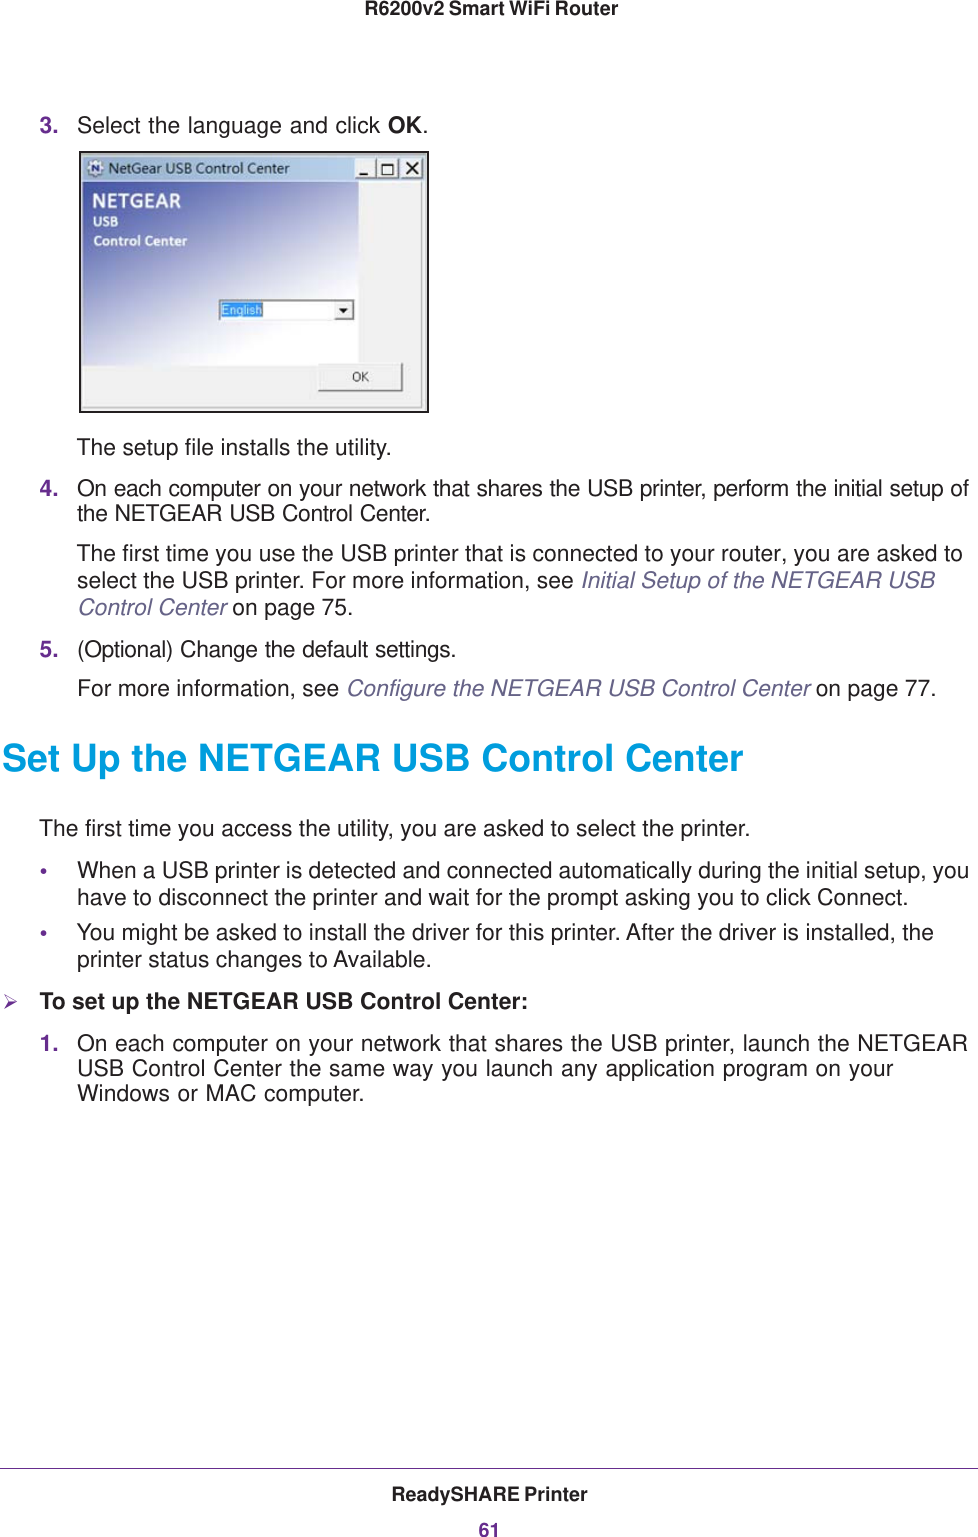 ReadySHARE Printer61 R6200v2 Smart WiFi Router3. Select the language and click OK.The setup file installs the utility.4. On each computer on your network that shares the USB printer, perform the initial setup of the NETGEAR USB Control Center.The first time you use the USB printer that is connected to your router, you are asked to select the USB printer. For more information, see Initial Setup of the NETGEAR USB Control Center on page 75.5. (Optional) Change the default settings.For more information, see Configure the NETGEAR USB Control Center on page 77.Set Up the NETGEAR USB Control CenterThe first time you access the utility, you are asked to select the printer.•When a USB printer is detected and connected automatically during the initial setup, you have to disconnect the printer and wait for the prompt asking you to click Connect.•You might be asked to install the driver for this printer. After the driver is installed, the printer status changes to Available.To set up the NETGEAR USB Control Center:1. On each computer on your network that shares the USB printer, launch the NETGEAR USB Control Center the same way you launch any application program on your Windows or MAC computer.